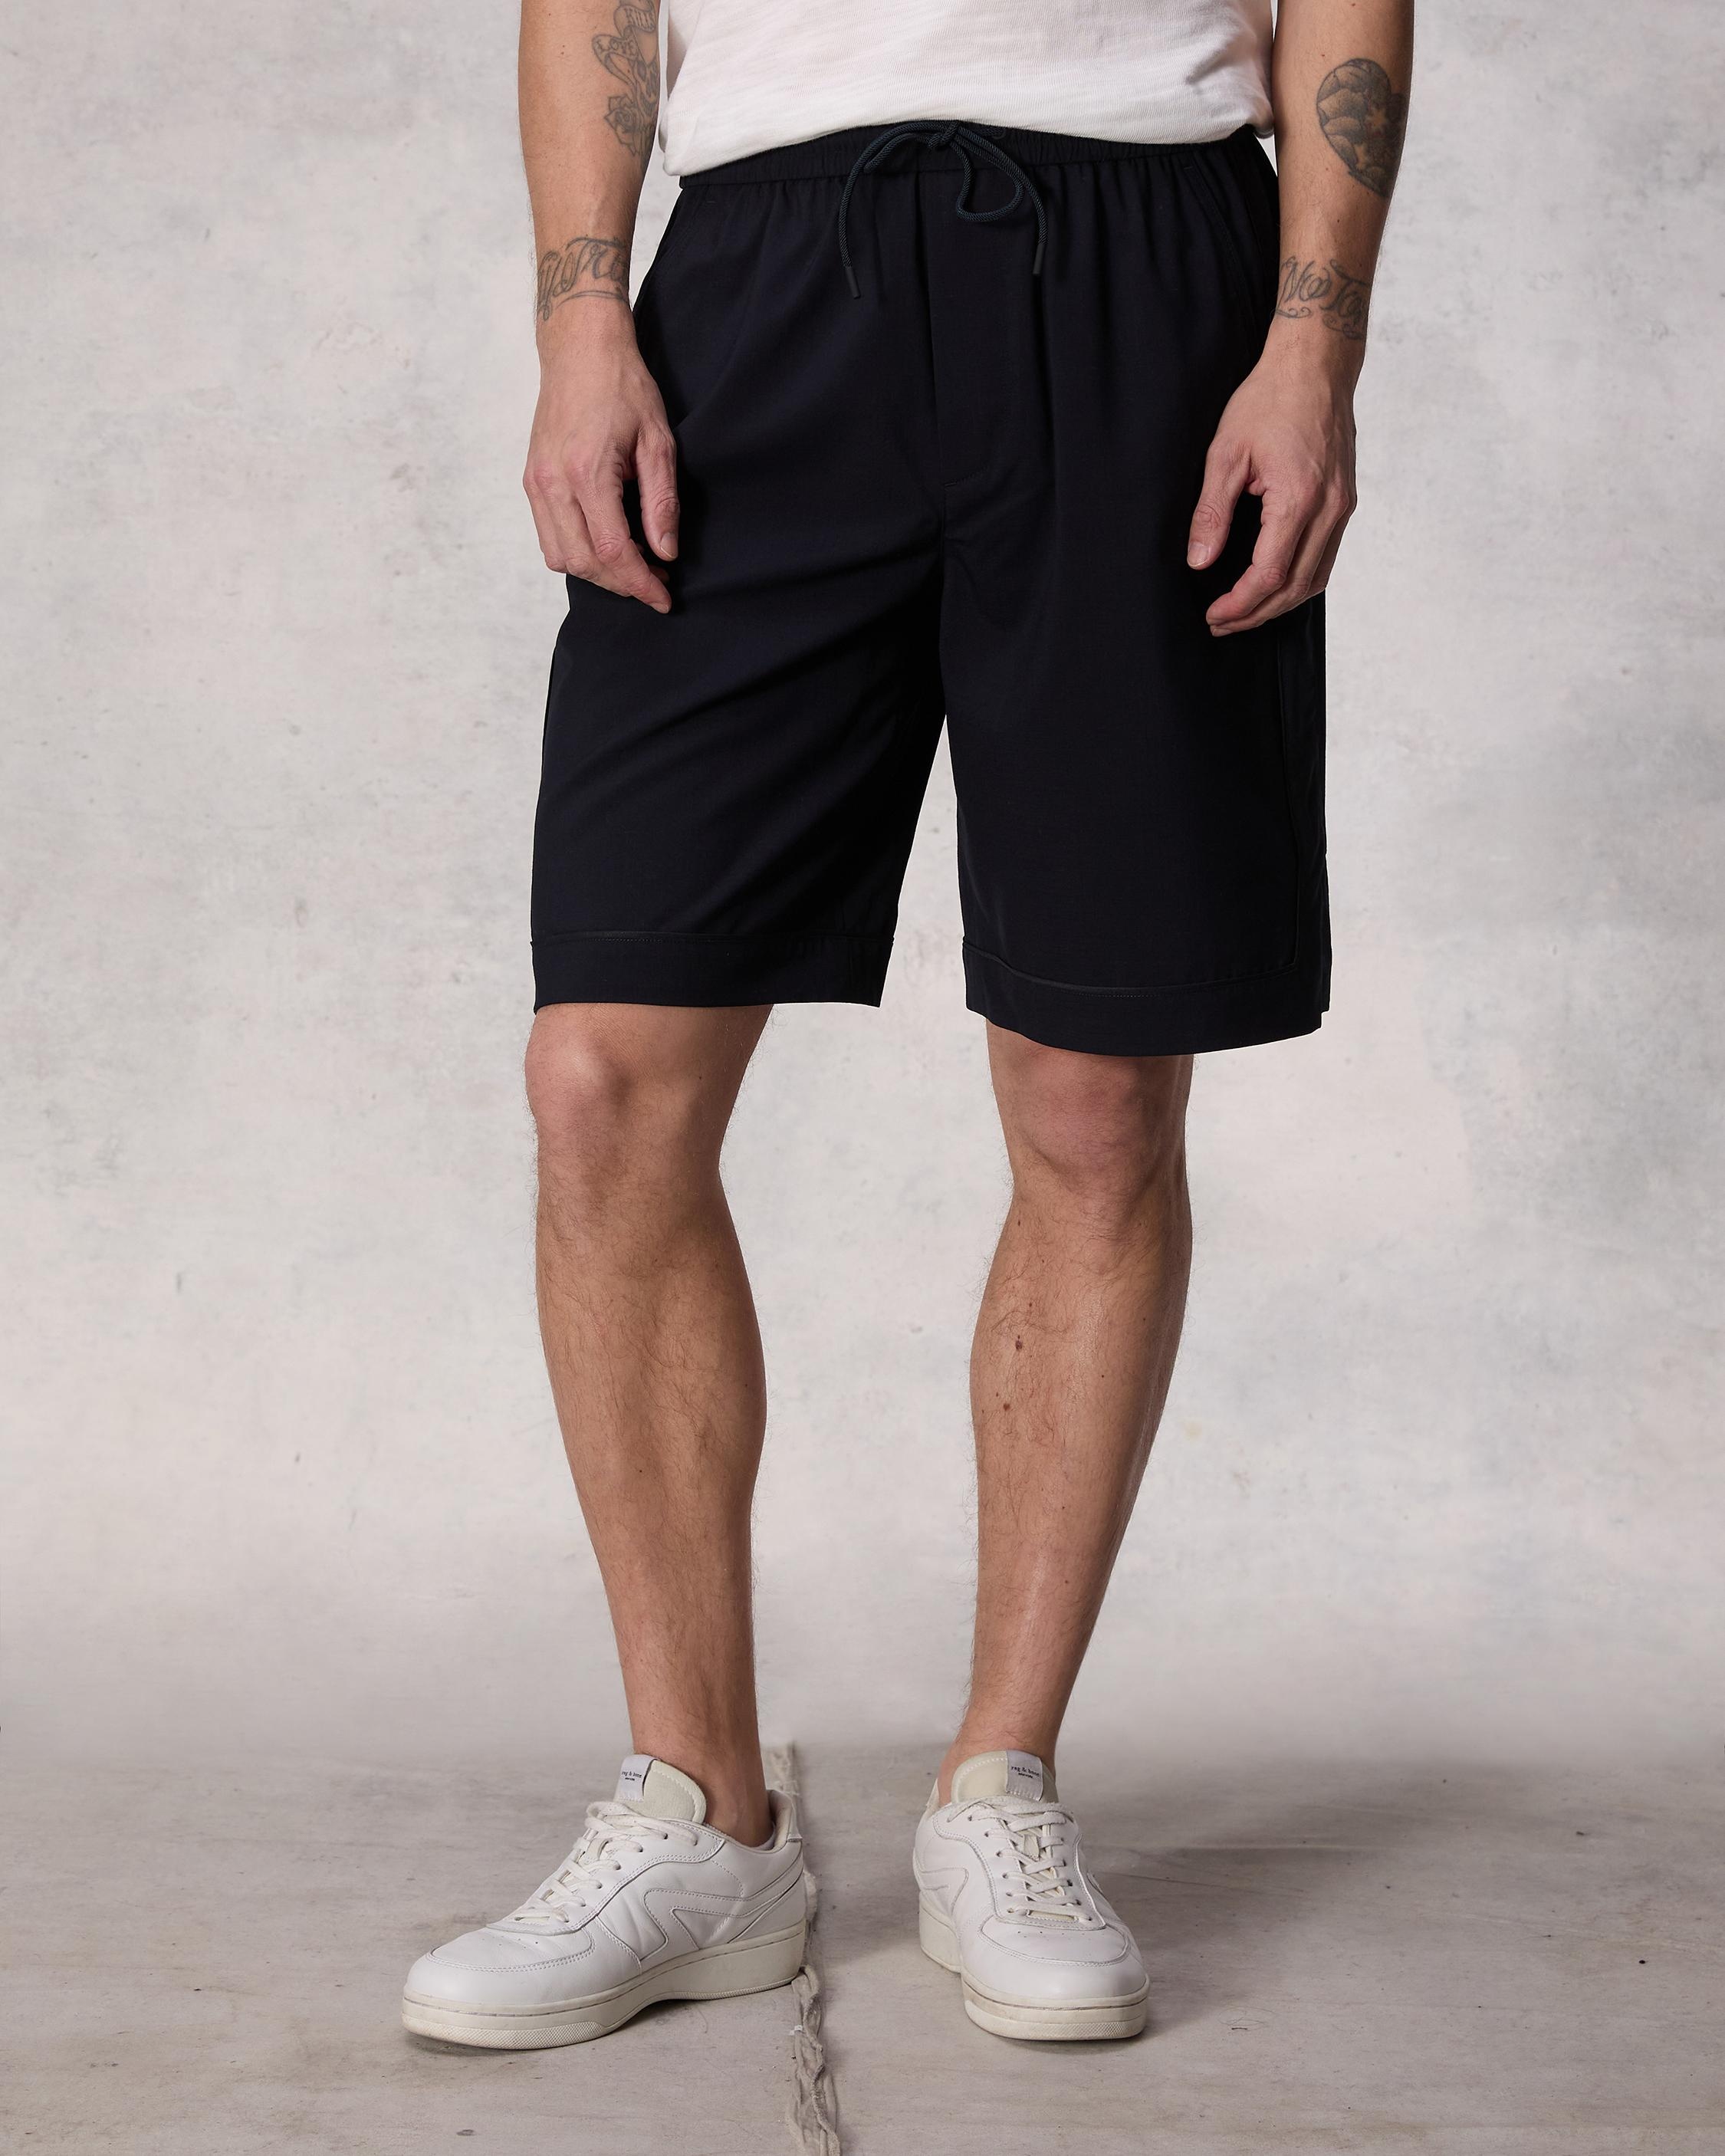 Irving Wool Short
Relaxed Fit - 5